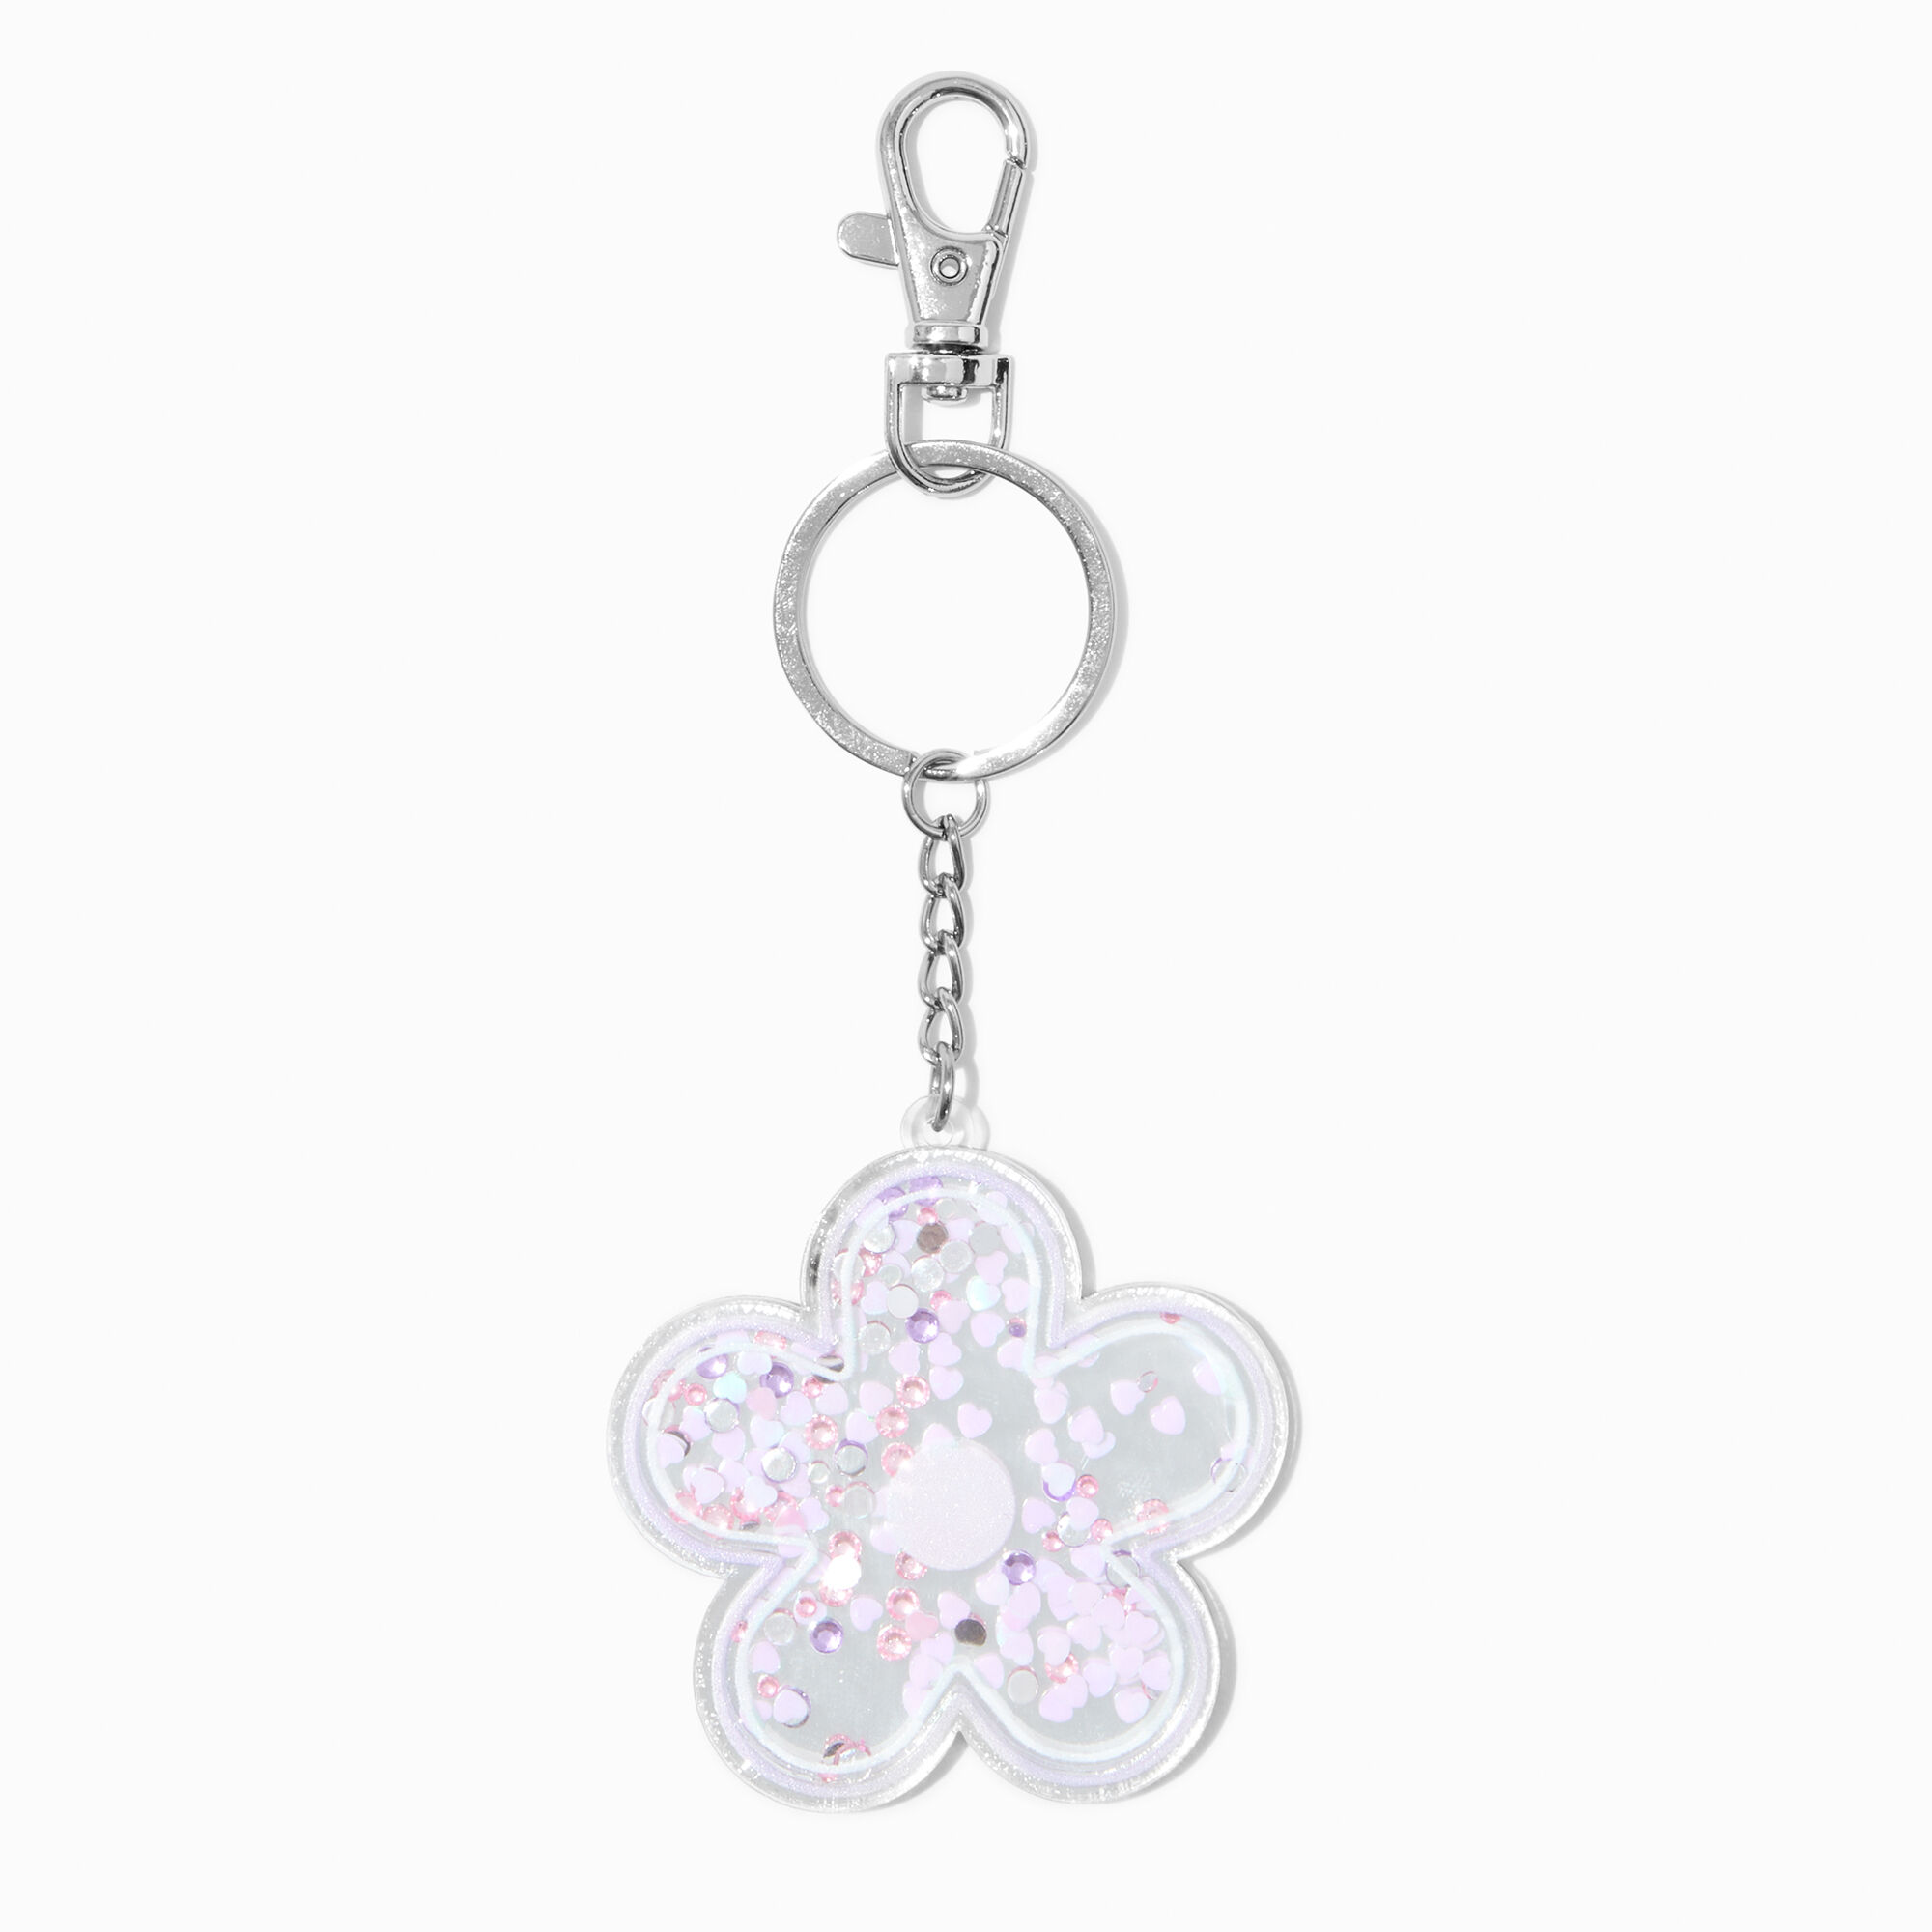 View Claires Daisy Shaker Mirror Keyring Purple information